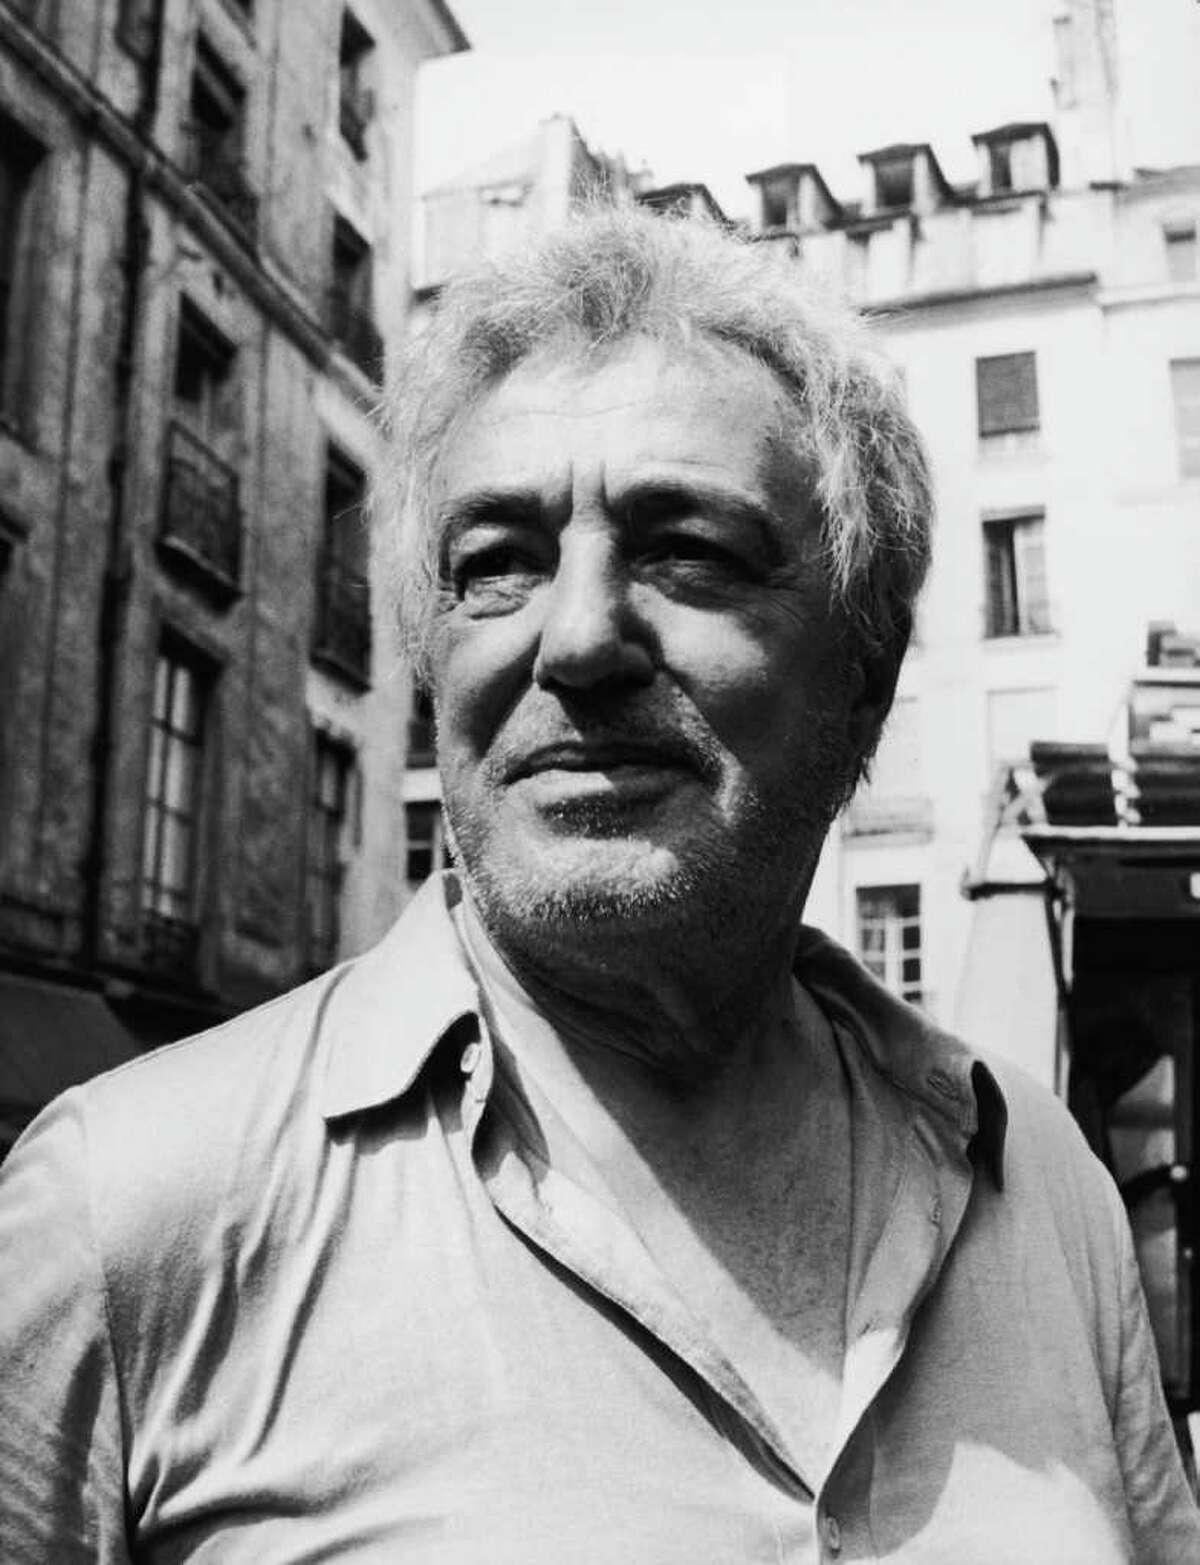 Italian actor-director Vittorio de Sica (1901 - 1974) filming 'L'Odeur des Fauves' ('Scandal Man') in St-Germain-des-Pres, Paris, 13th July 1971. He plays the character of Milord in the film. (Photo by Keystone/Hulton Archive/Getty Images)